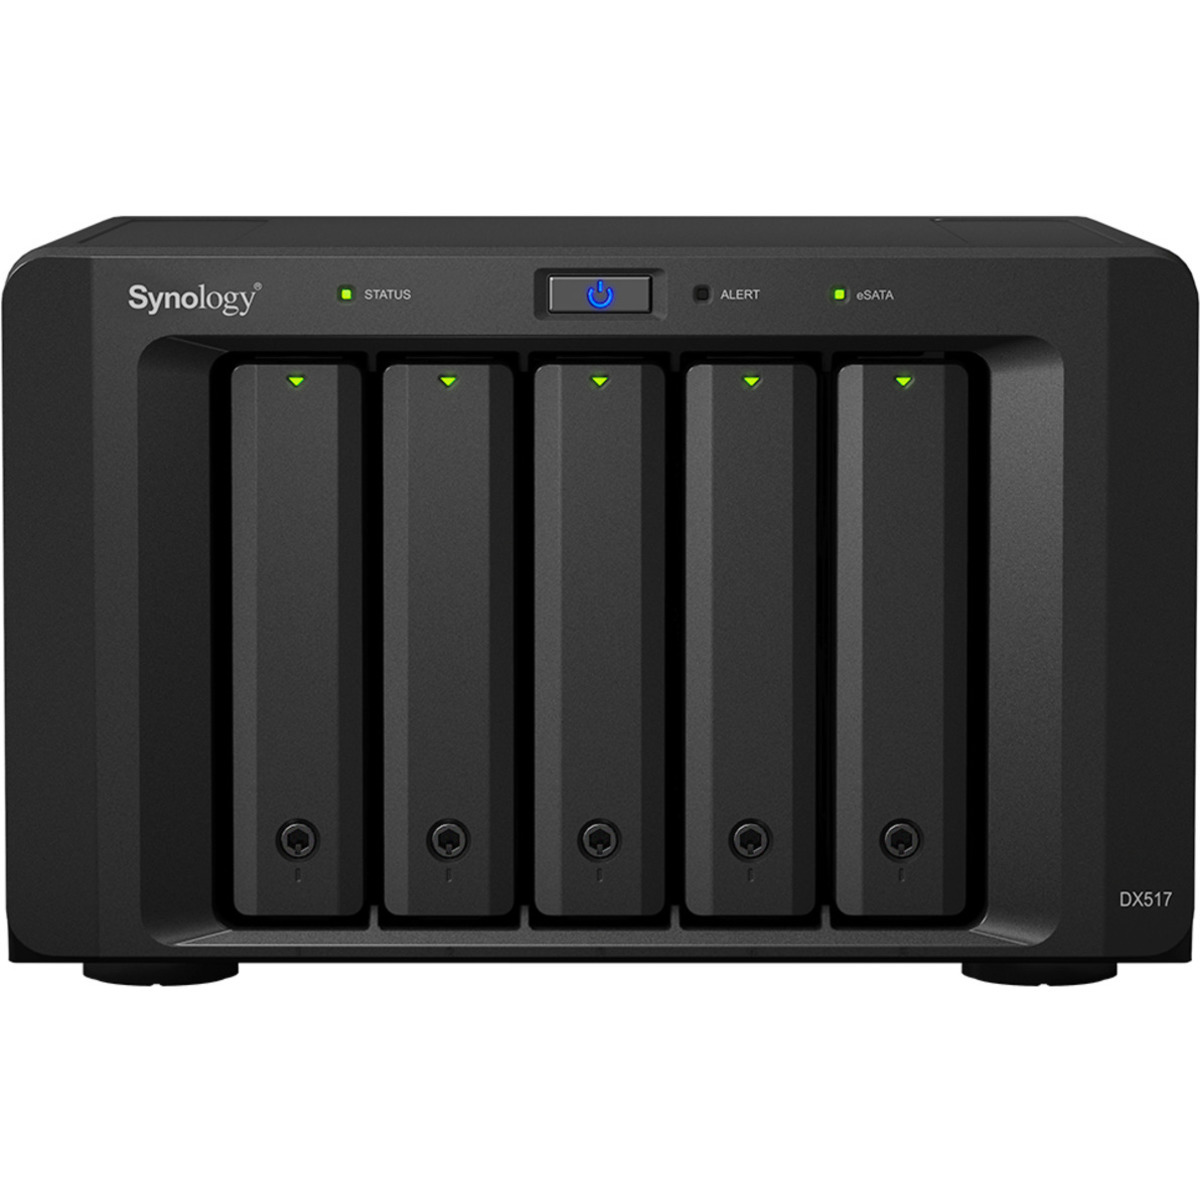 buy $2318 Synology DX517 100tb Desktop Expansion Enclosure 5x20000gb Seagate EXOS X20 ST20000NM007D 3.5 7200rpm SATA 6Gb/s HDD ENTERPRISE Class Drives Installed - Burn-In Tested - nas headquarters buy network attached storage server device das new raid-5 free shipping usa DX517